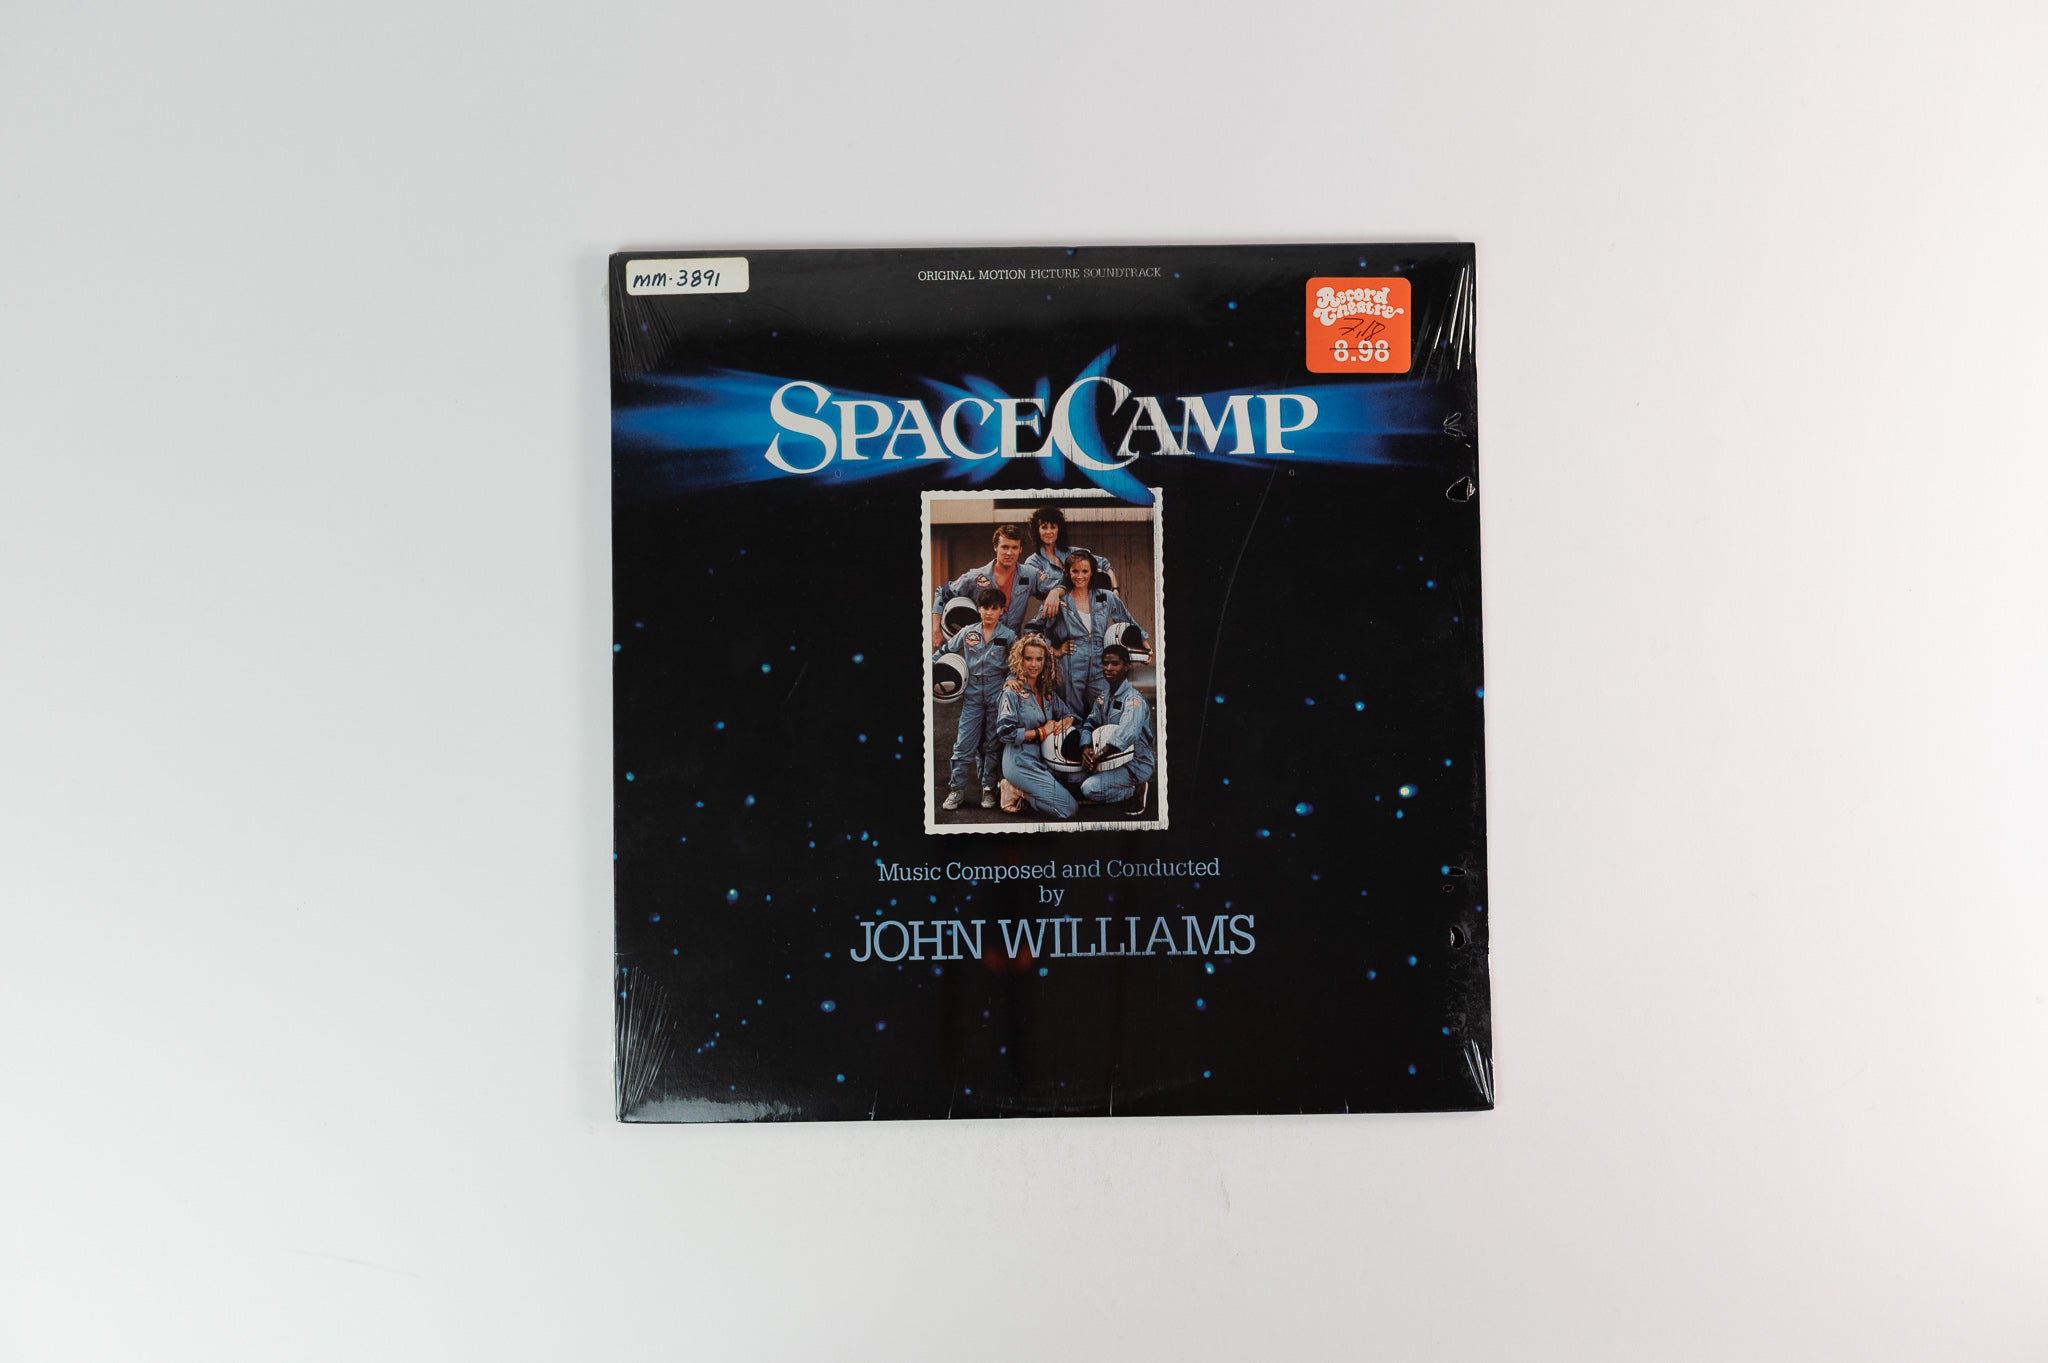 John Williams - SpaceCamp (Original Motion Picture Soundtrack) on RCA Sealed